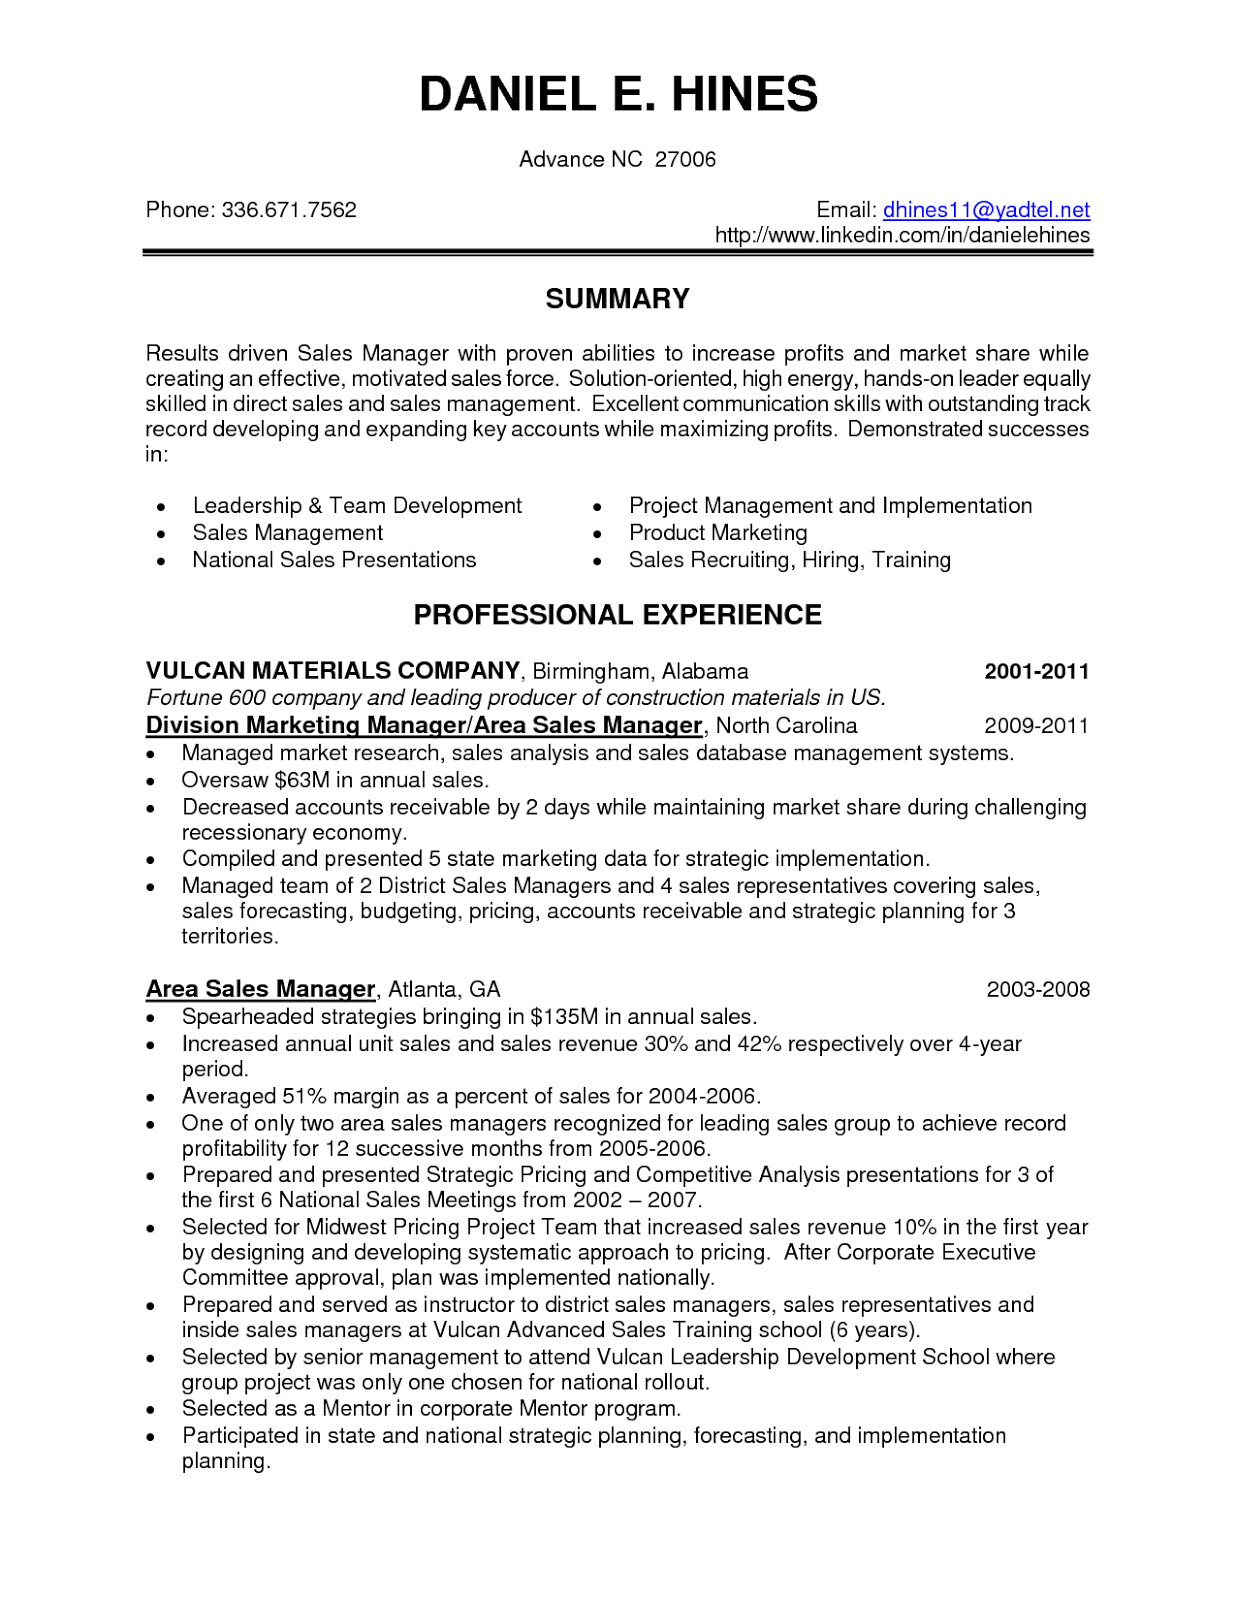 Strong writing skills in resume